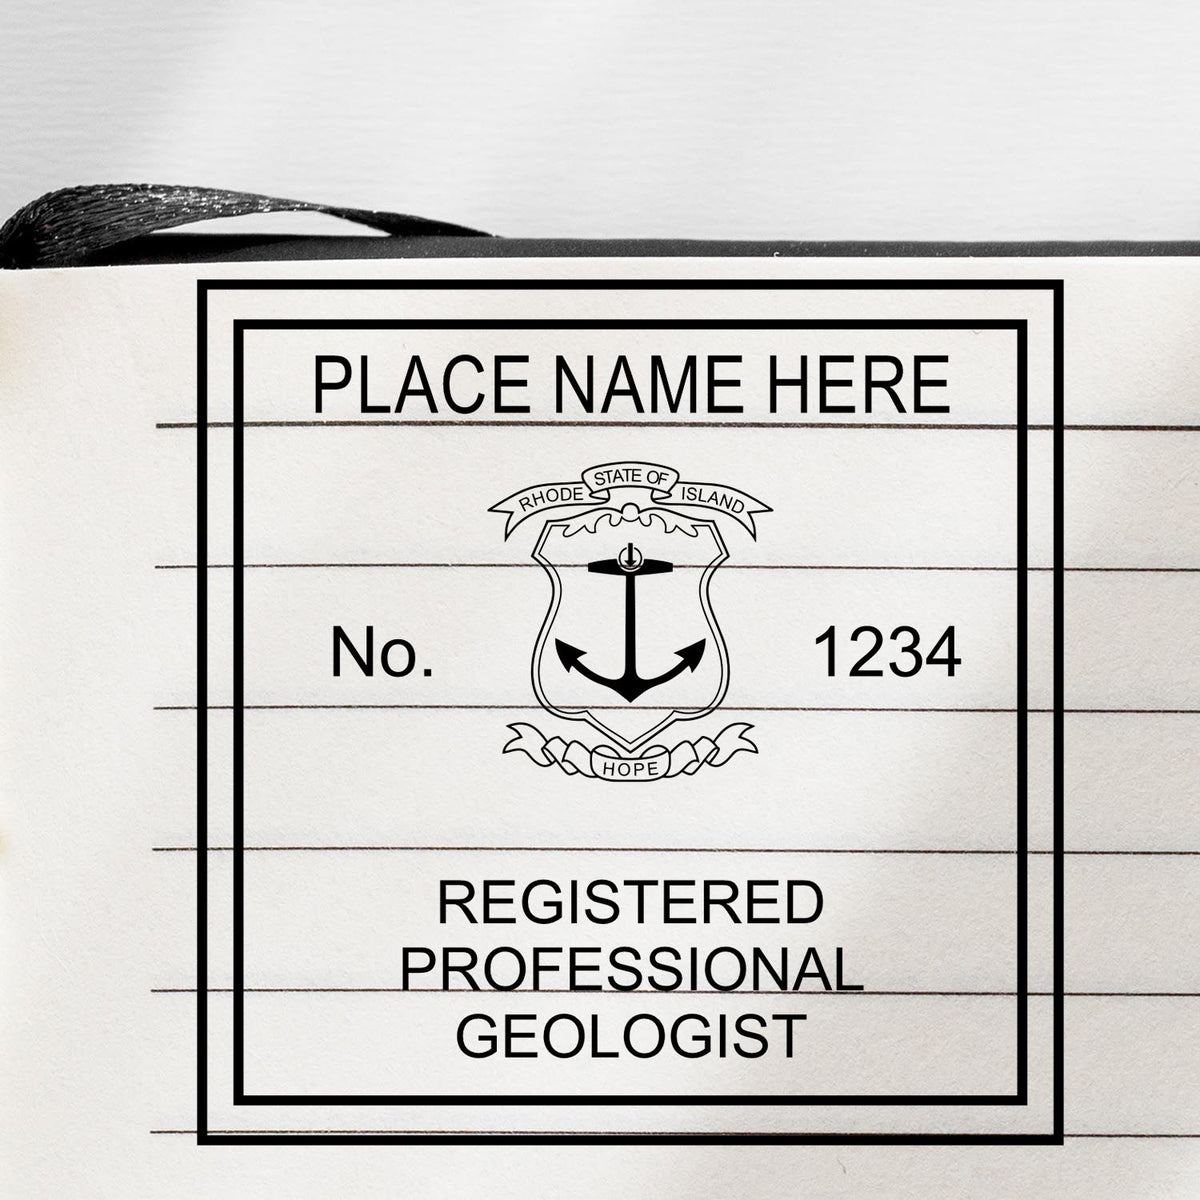 A stamped imprint of the Digital Rhode Island Geologist Stamp, Electronic Seal for Rhode Island Geologist in this stylish lifestyle photo, setting the tone for a unique and personalized product.